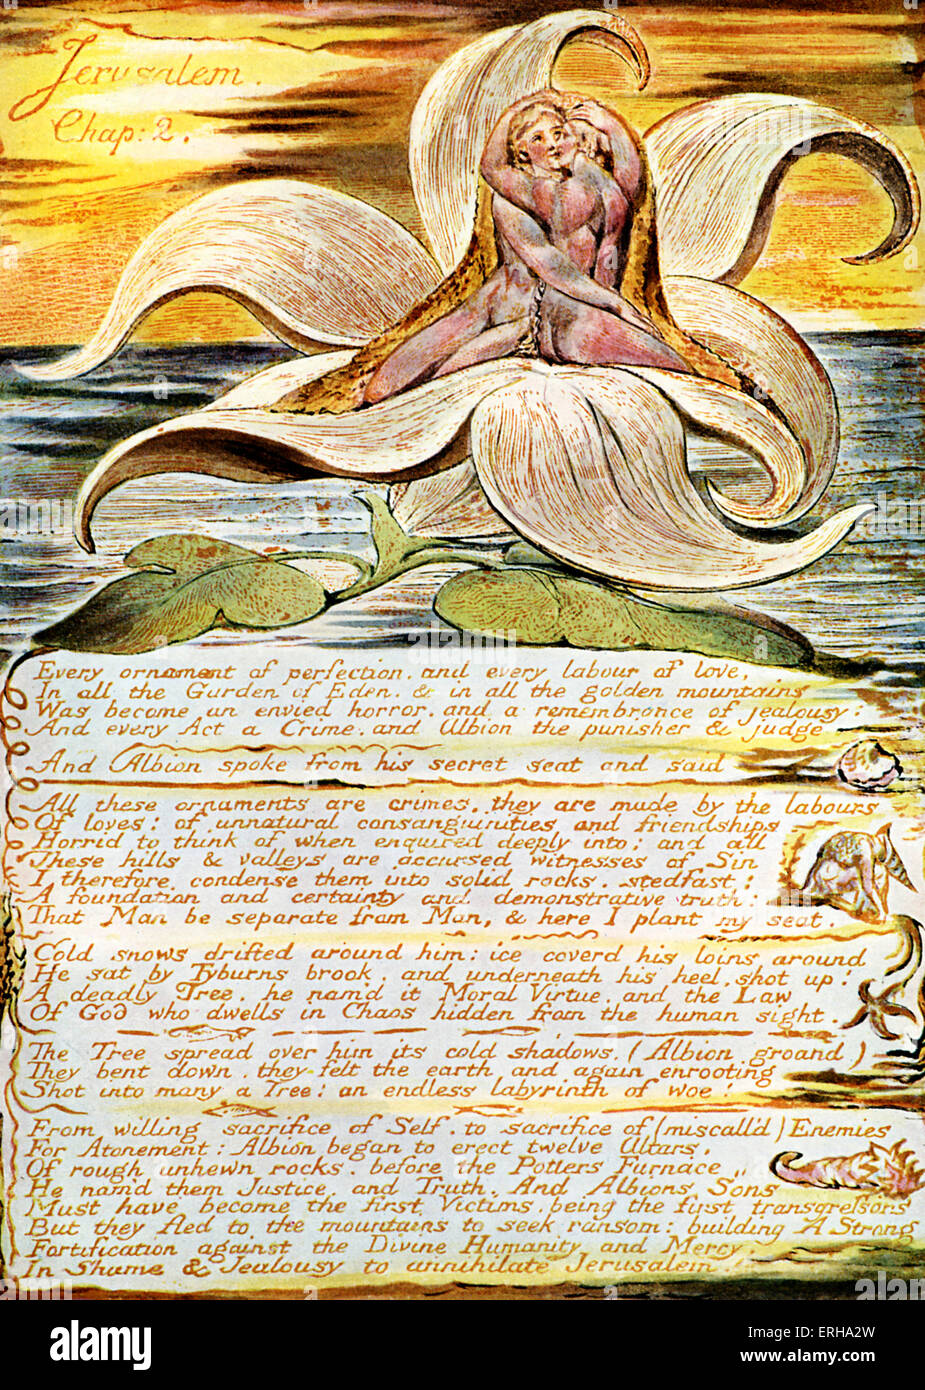 Vala and Jerusalem 'Assimilating in One', in the Cup of a Lily, Chapter 2 of the poem 'Jerusalem' by William Blake, 1804-1820. Stock Photo